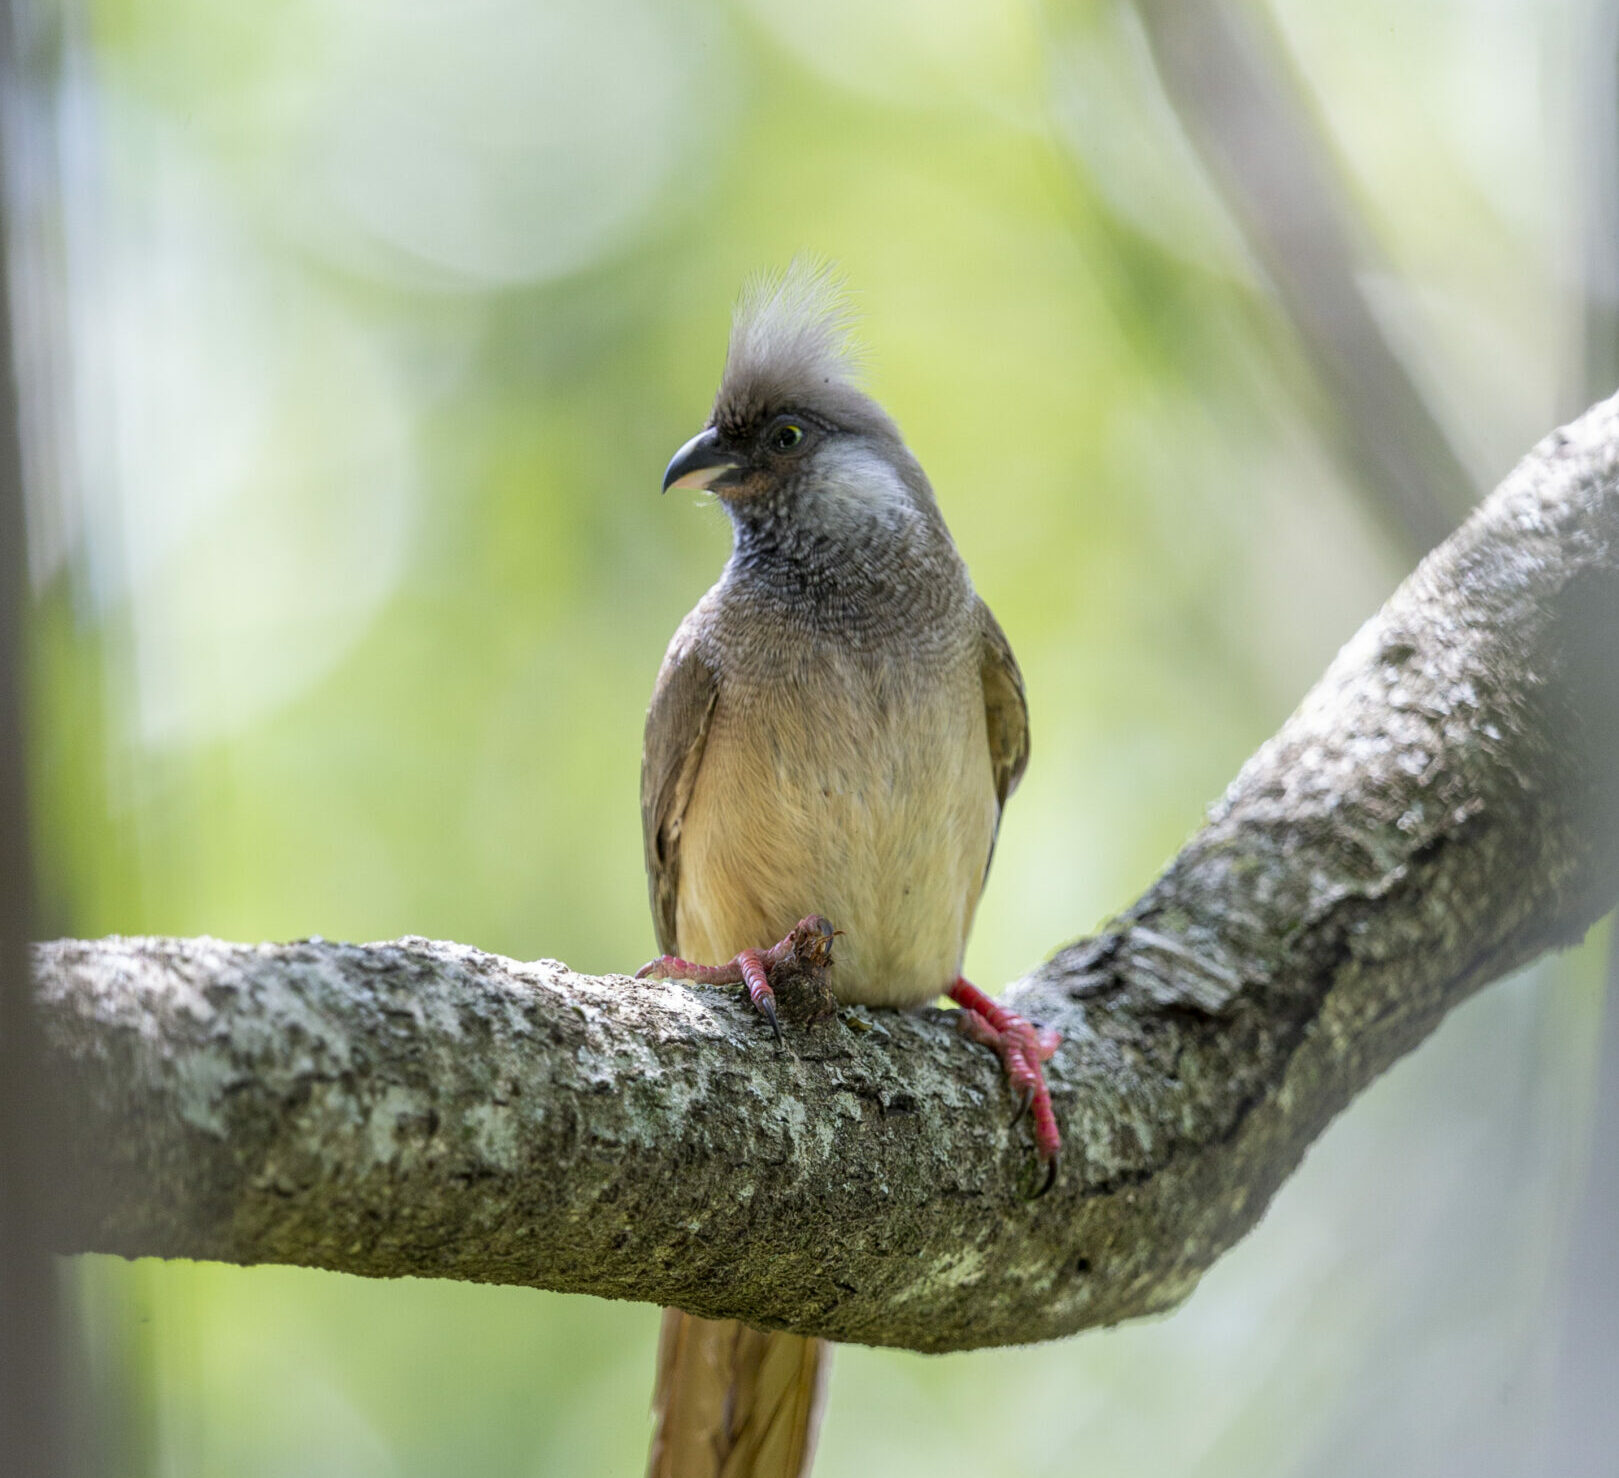 A Speckled Mousebird sits on a branch, surrounded by lush greenery